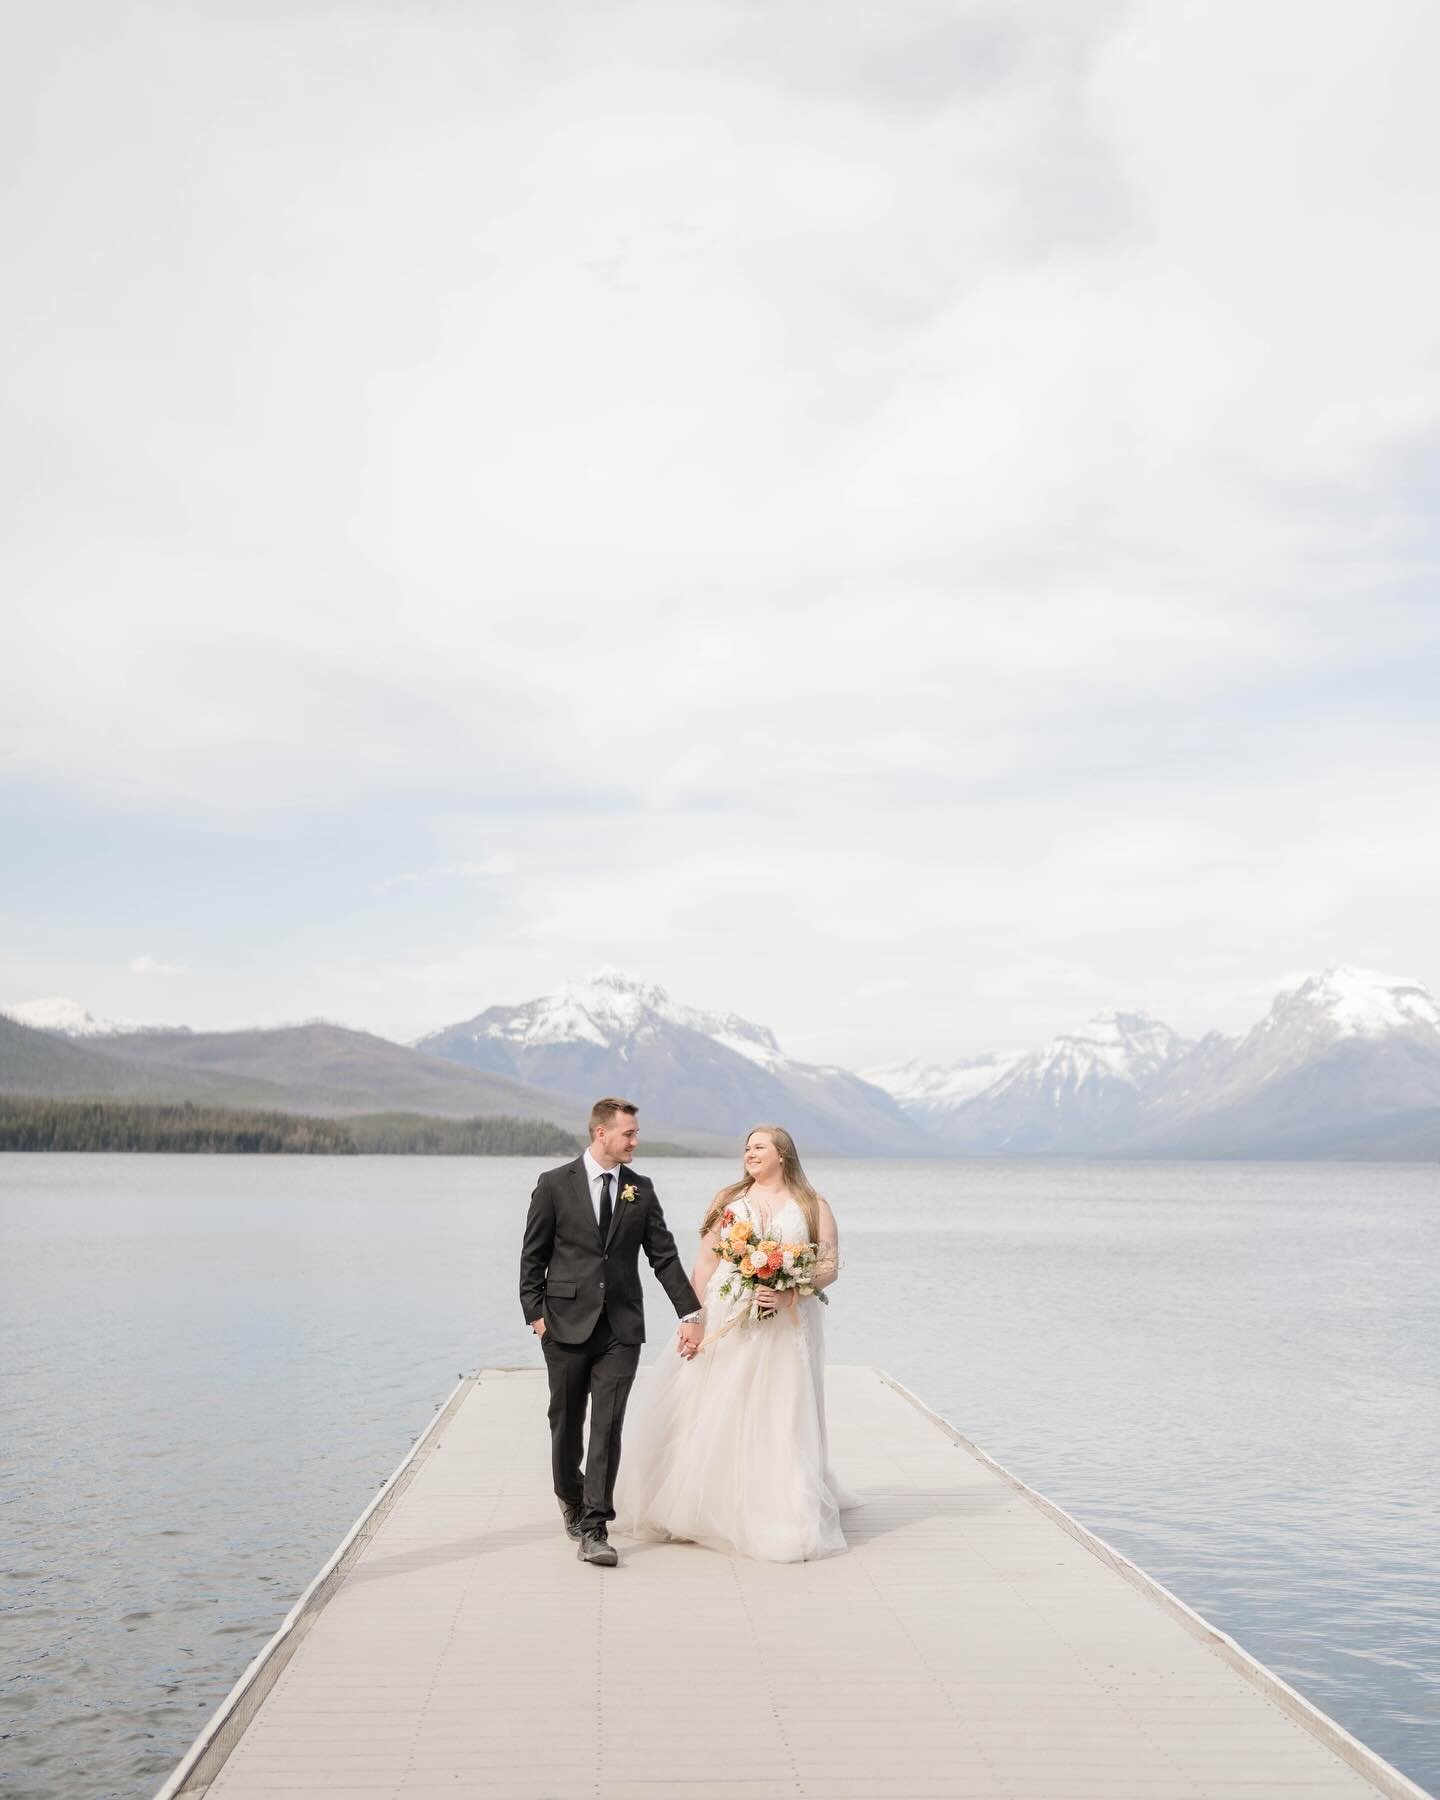 Congrats to Courtney and Jarrod!
⠀⠀⠀⠀⠀⠀⠀⠀⠀
Destination elopements may just be my new favorite.
⠀⠀⠀⠀⠀⠀⠀⠀⠀
Glacier National Park was the most amazing backdrop for their intimate ceremony and just married photos.